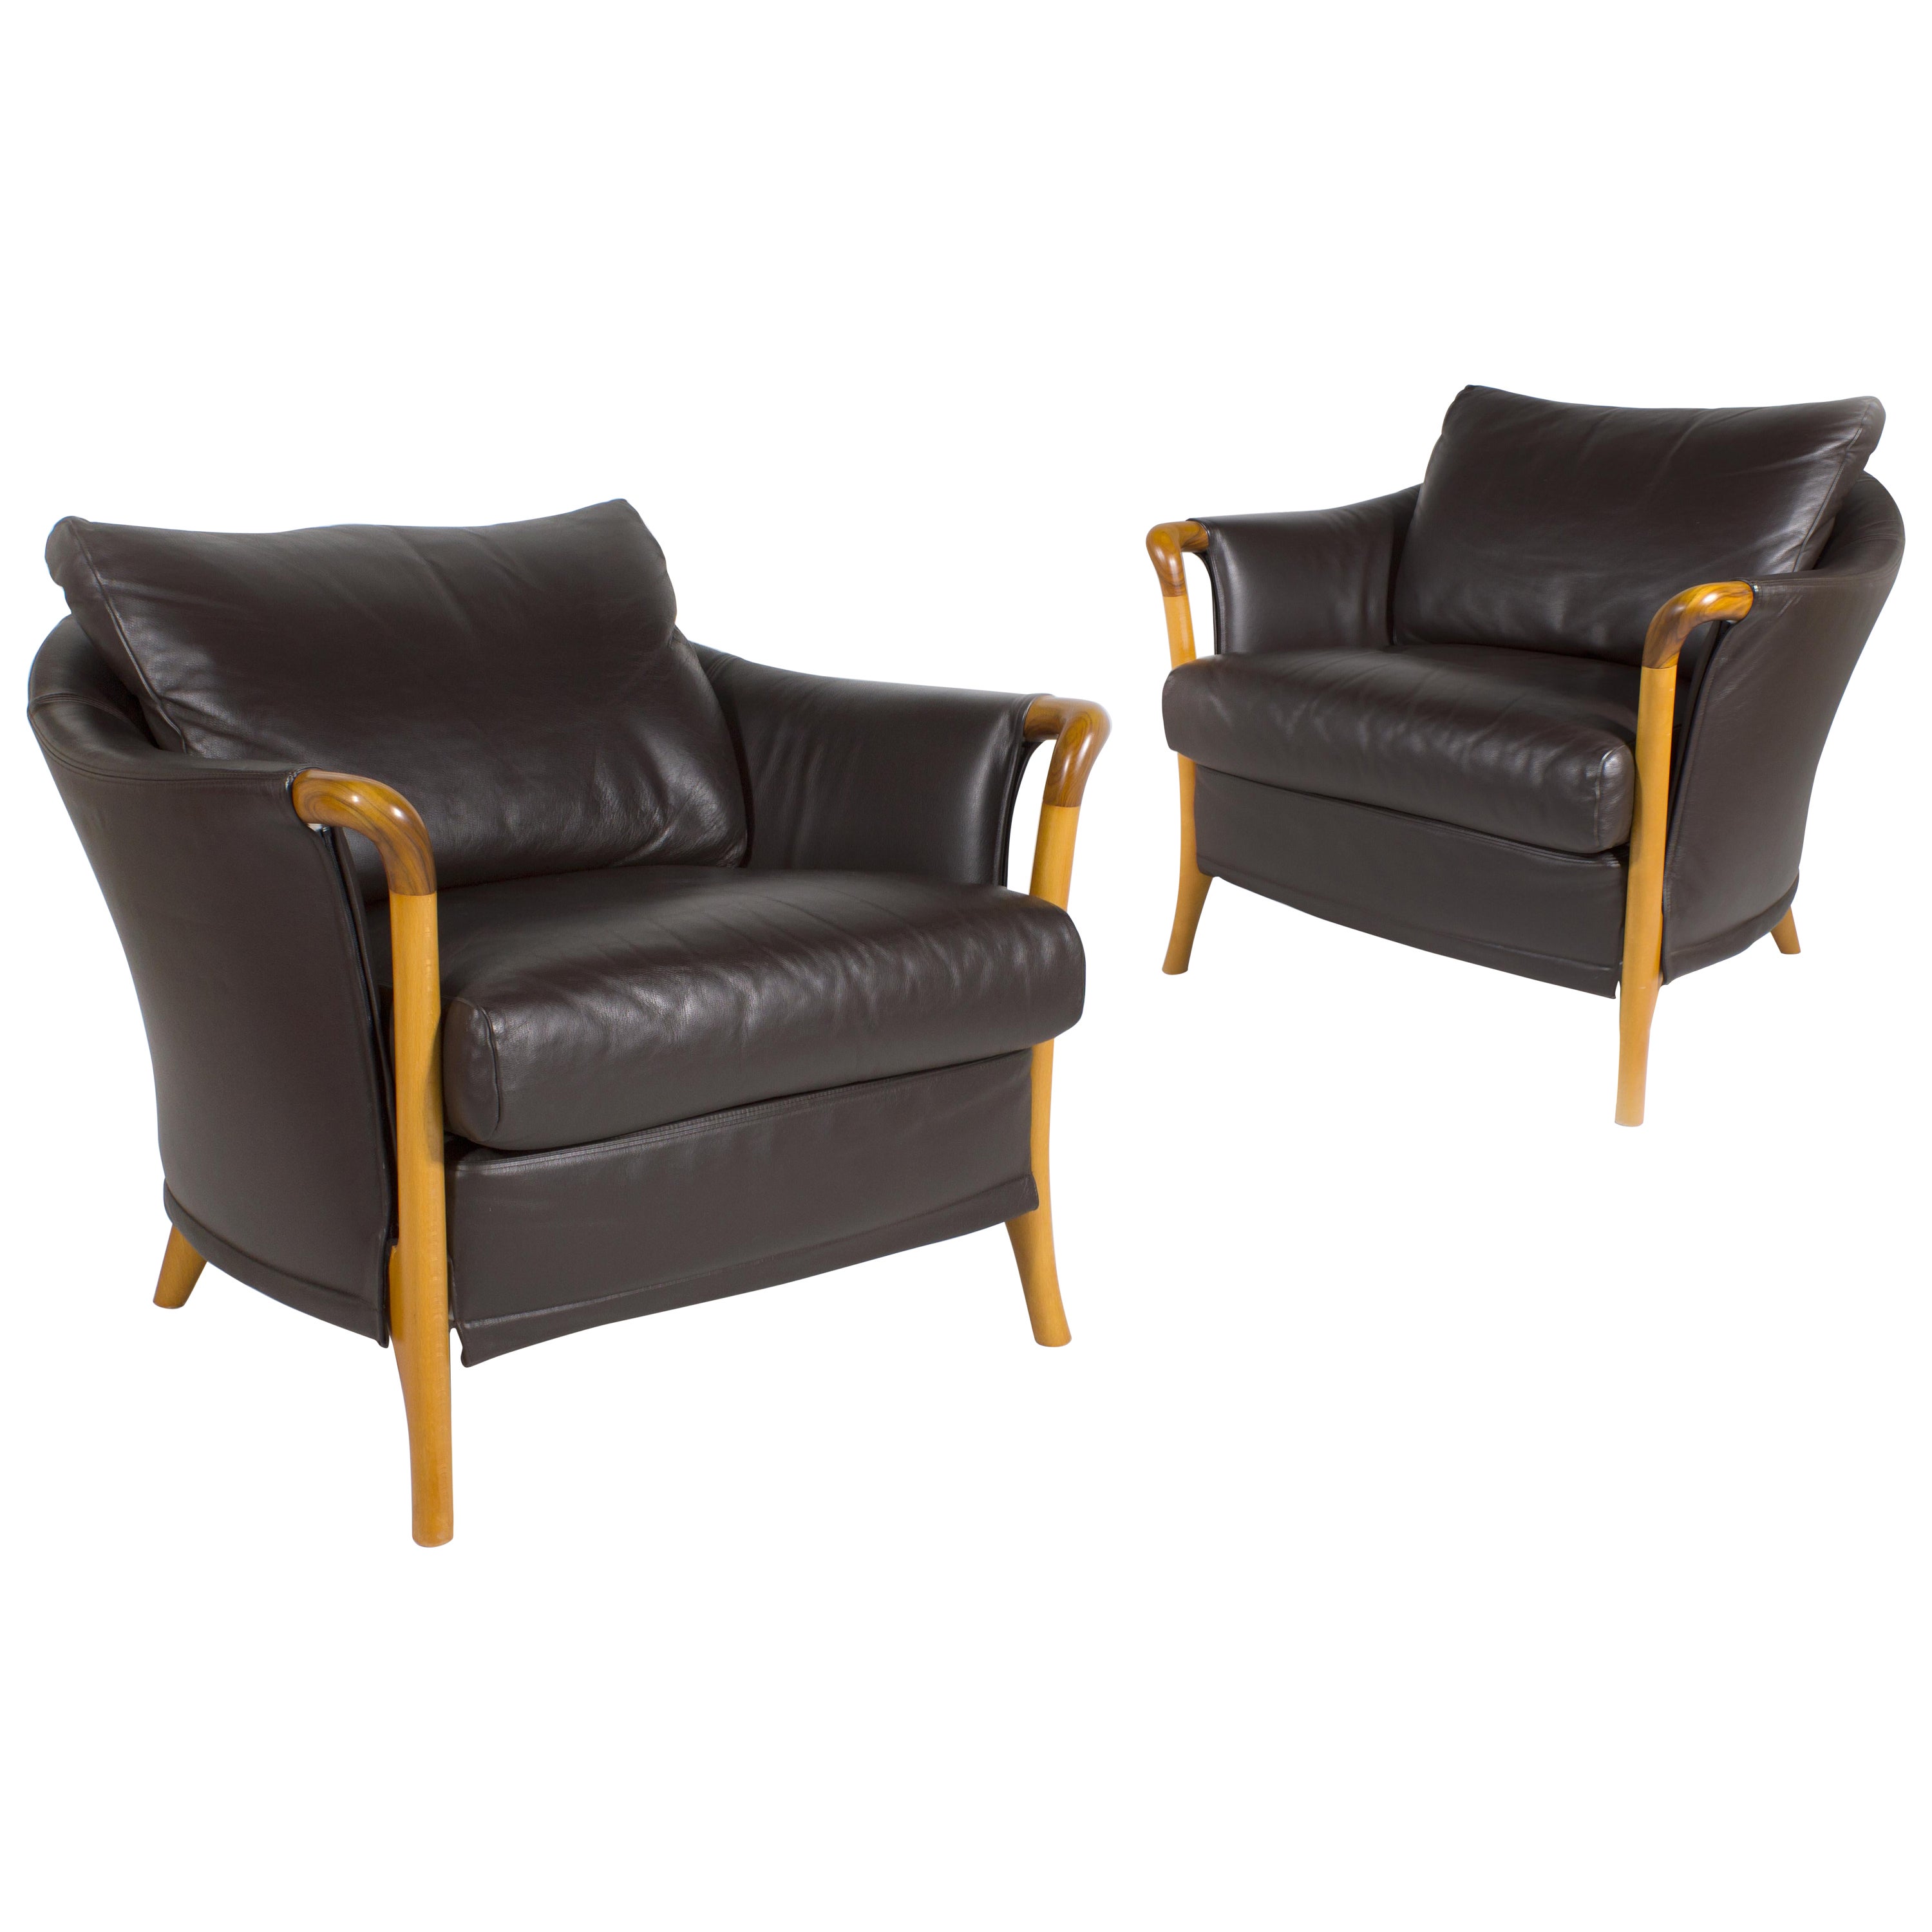 Giorgetti Progetti Series 'Peggy' Lounge Chairs in Chocolate Brown Leather For Sale